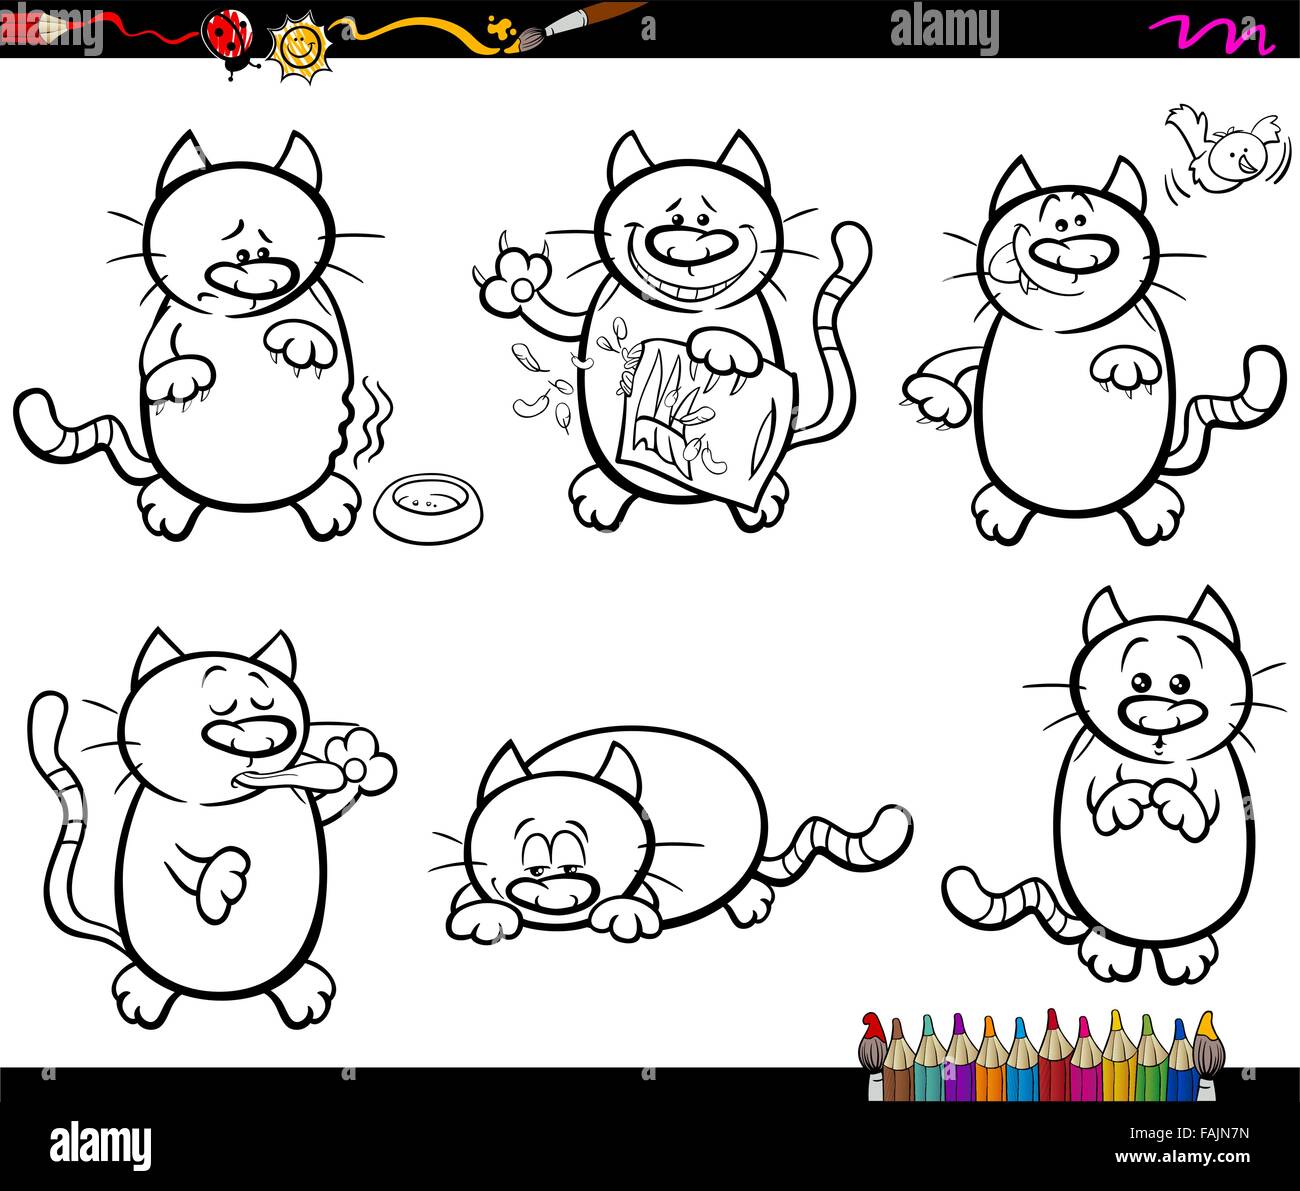 Black and White Cartoon Illustration of Cute Cats Animal Characters Set for Coloring Book Stock Vector